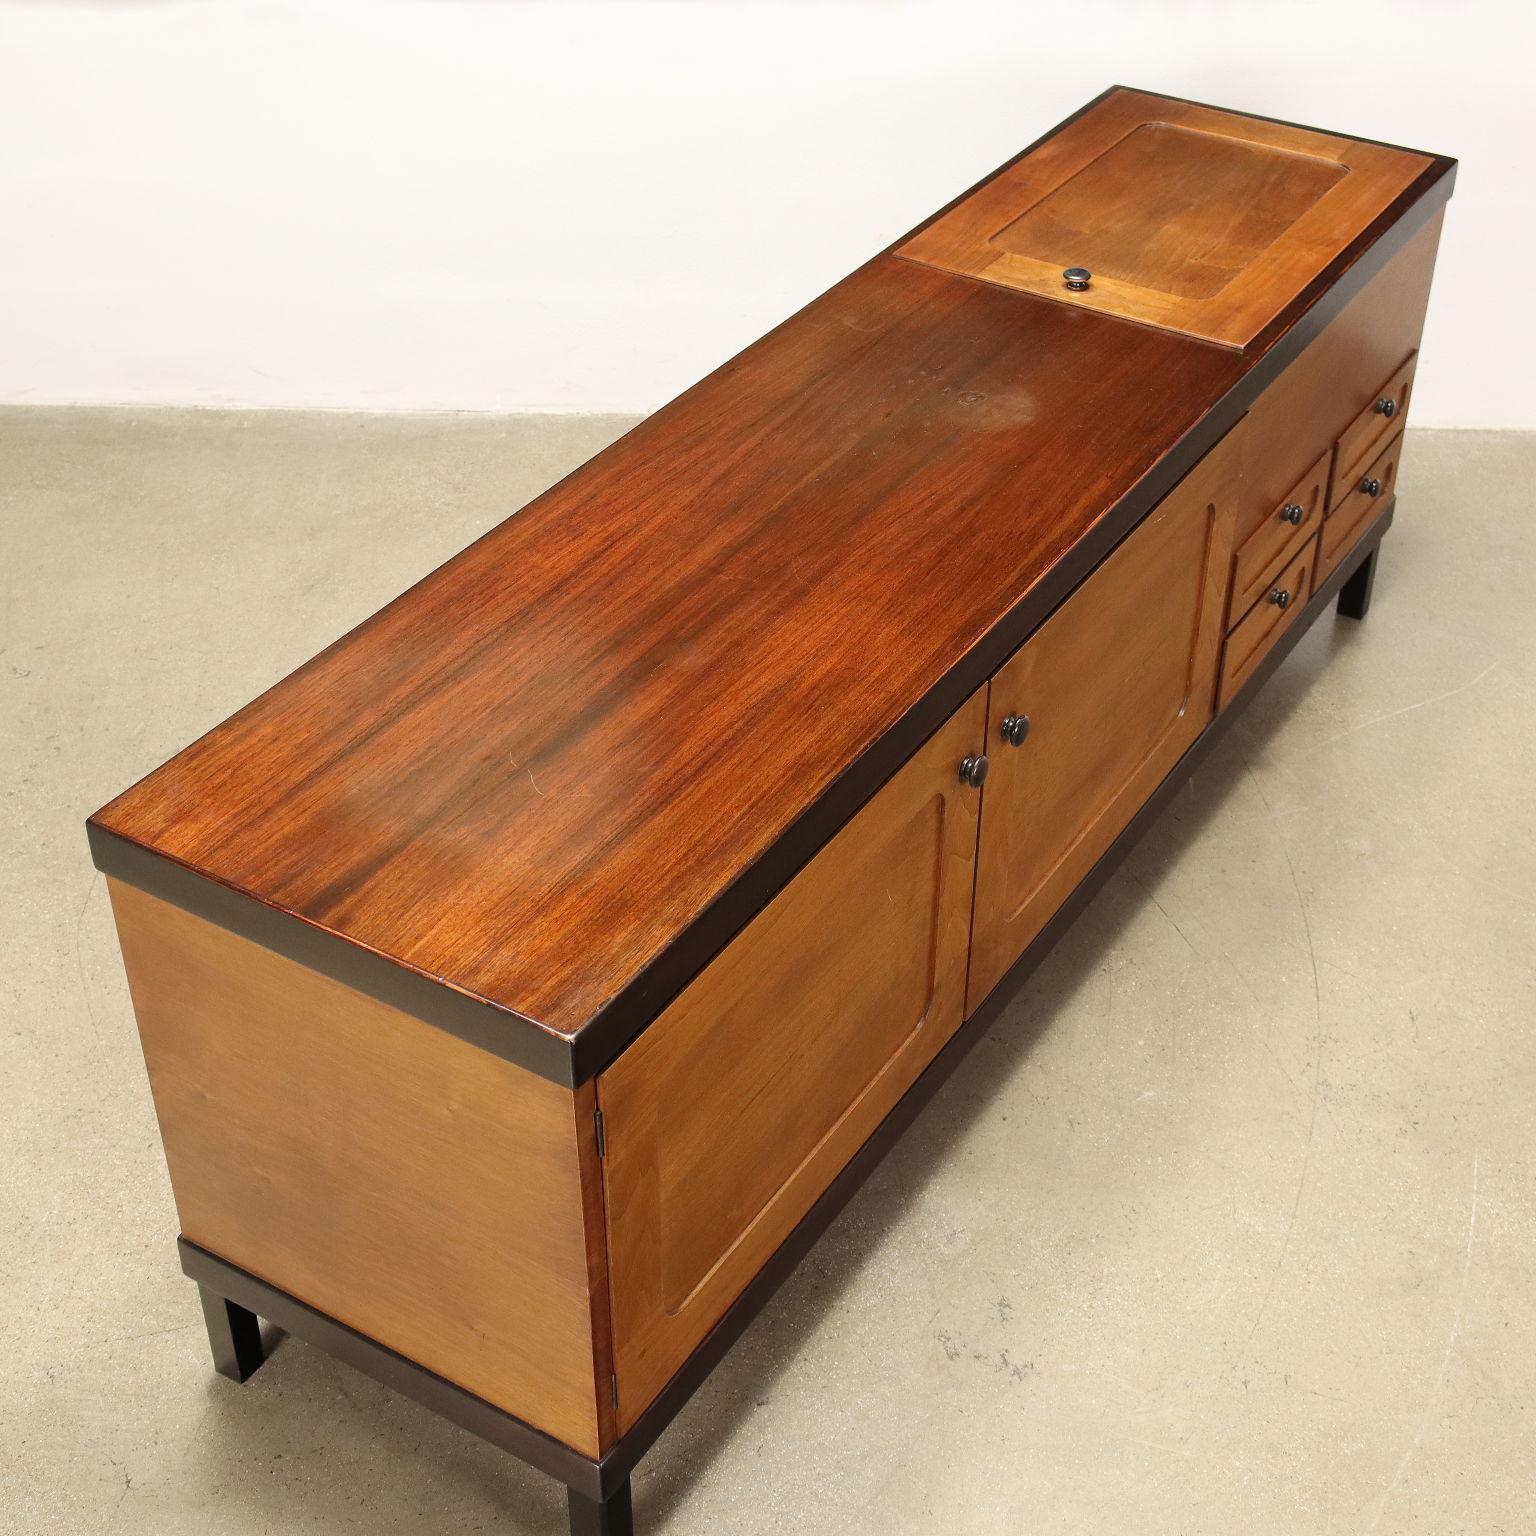 Elam Sideboard by Piero Ranzani Exotic Wood, Italy, 1960s-70s For Sale 4